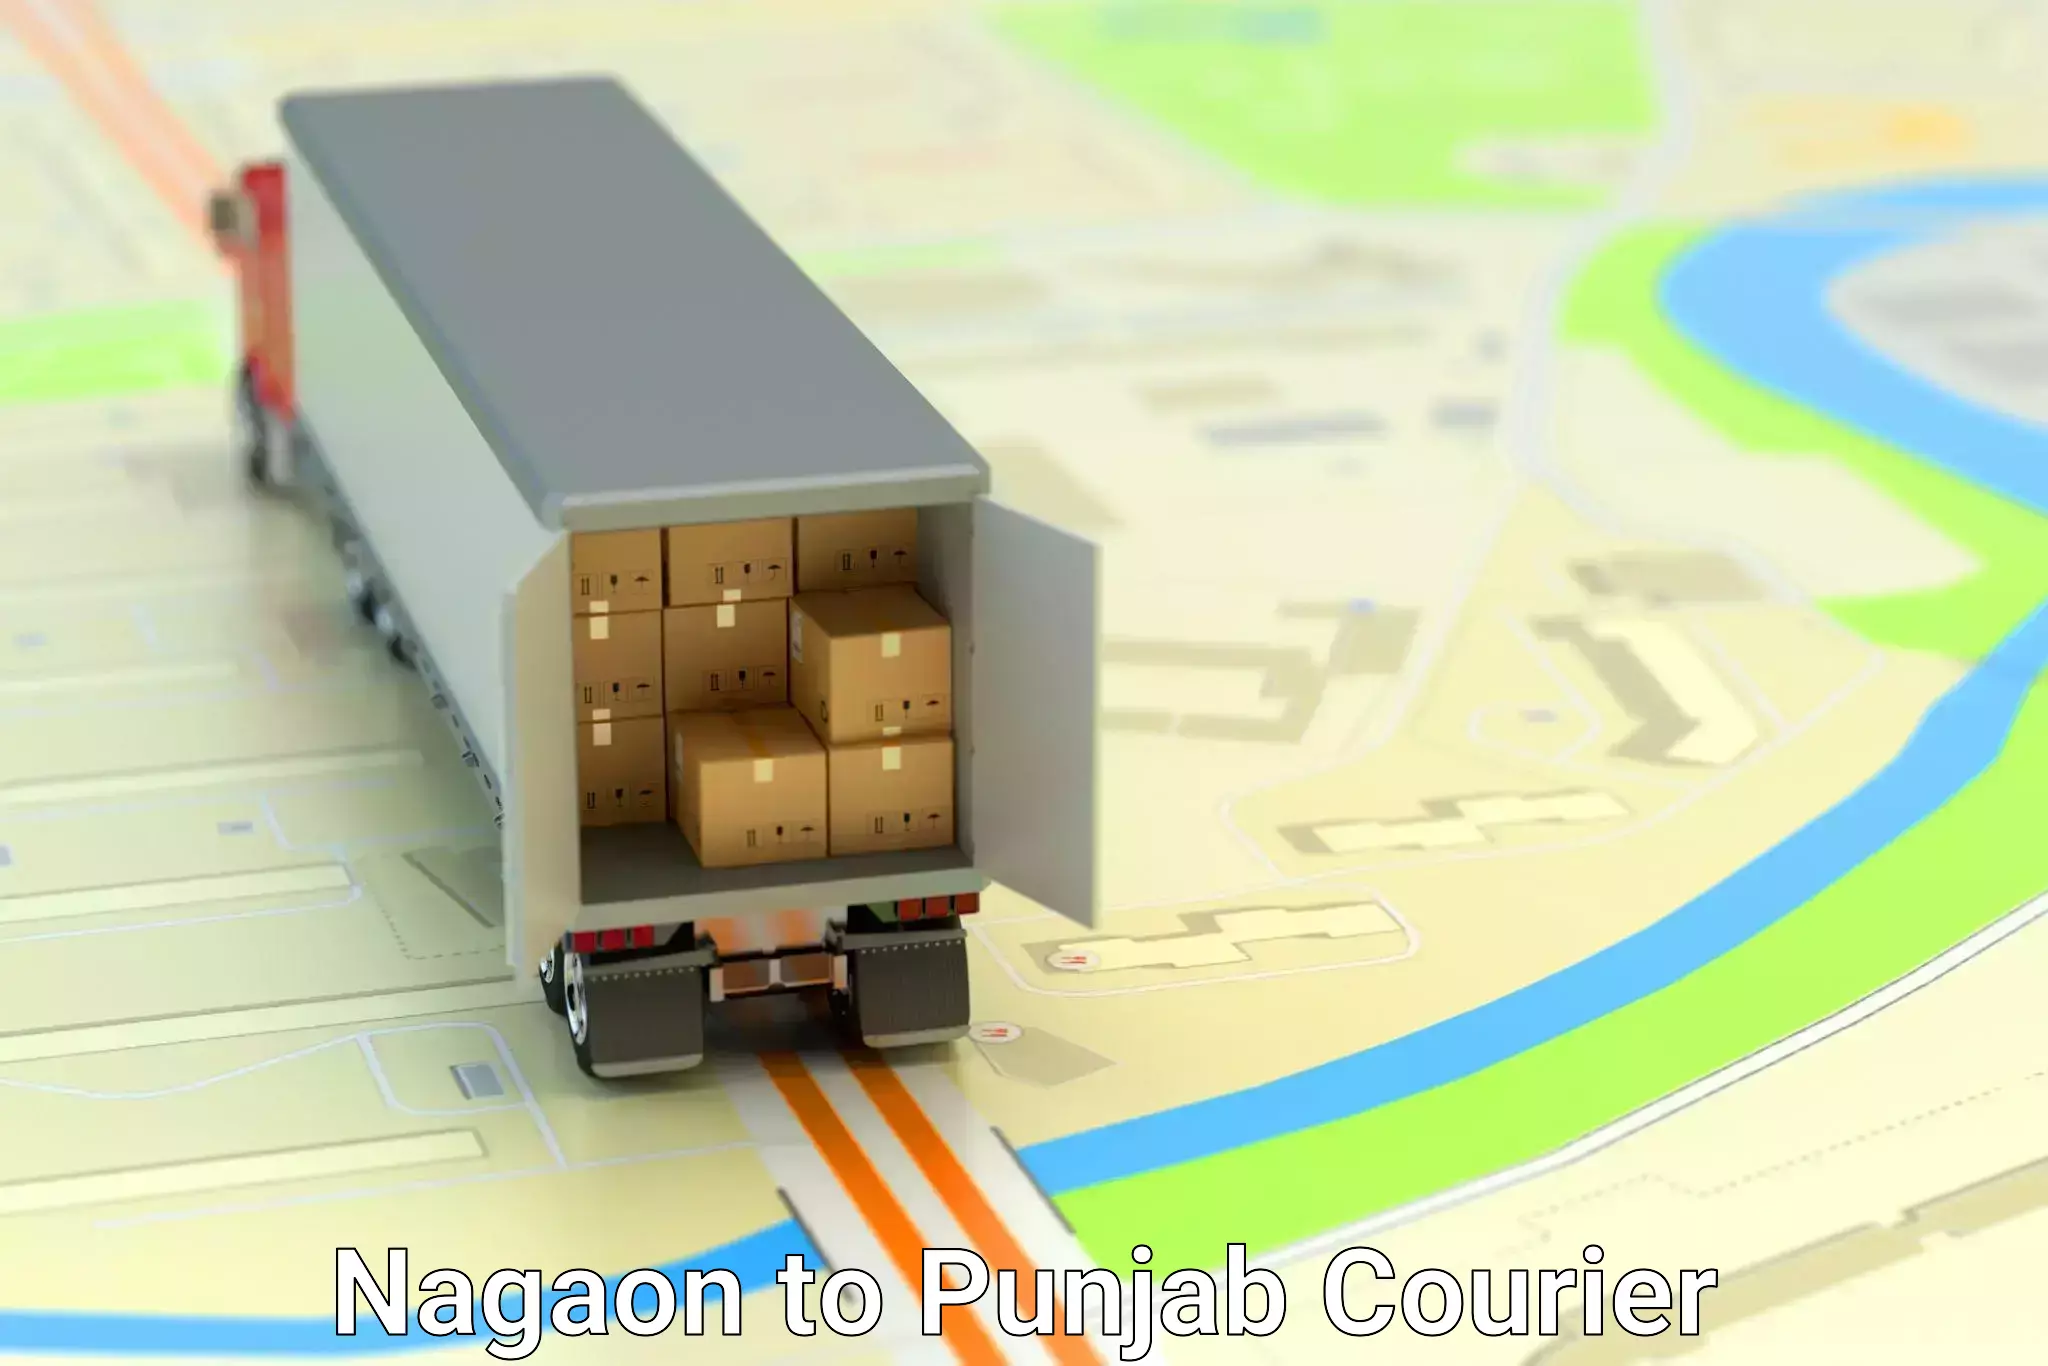 Express delivery capabilities in Nagaon to Bathinda